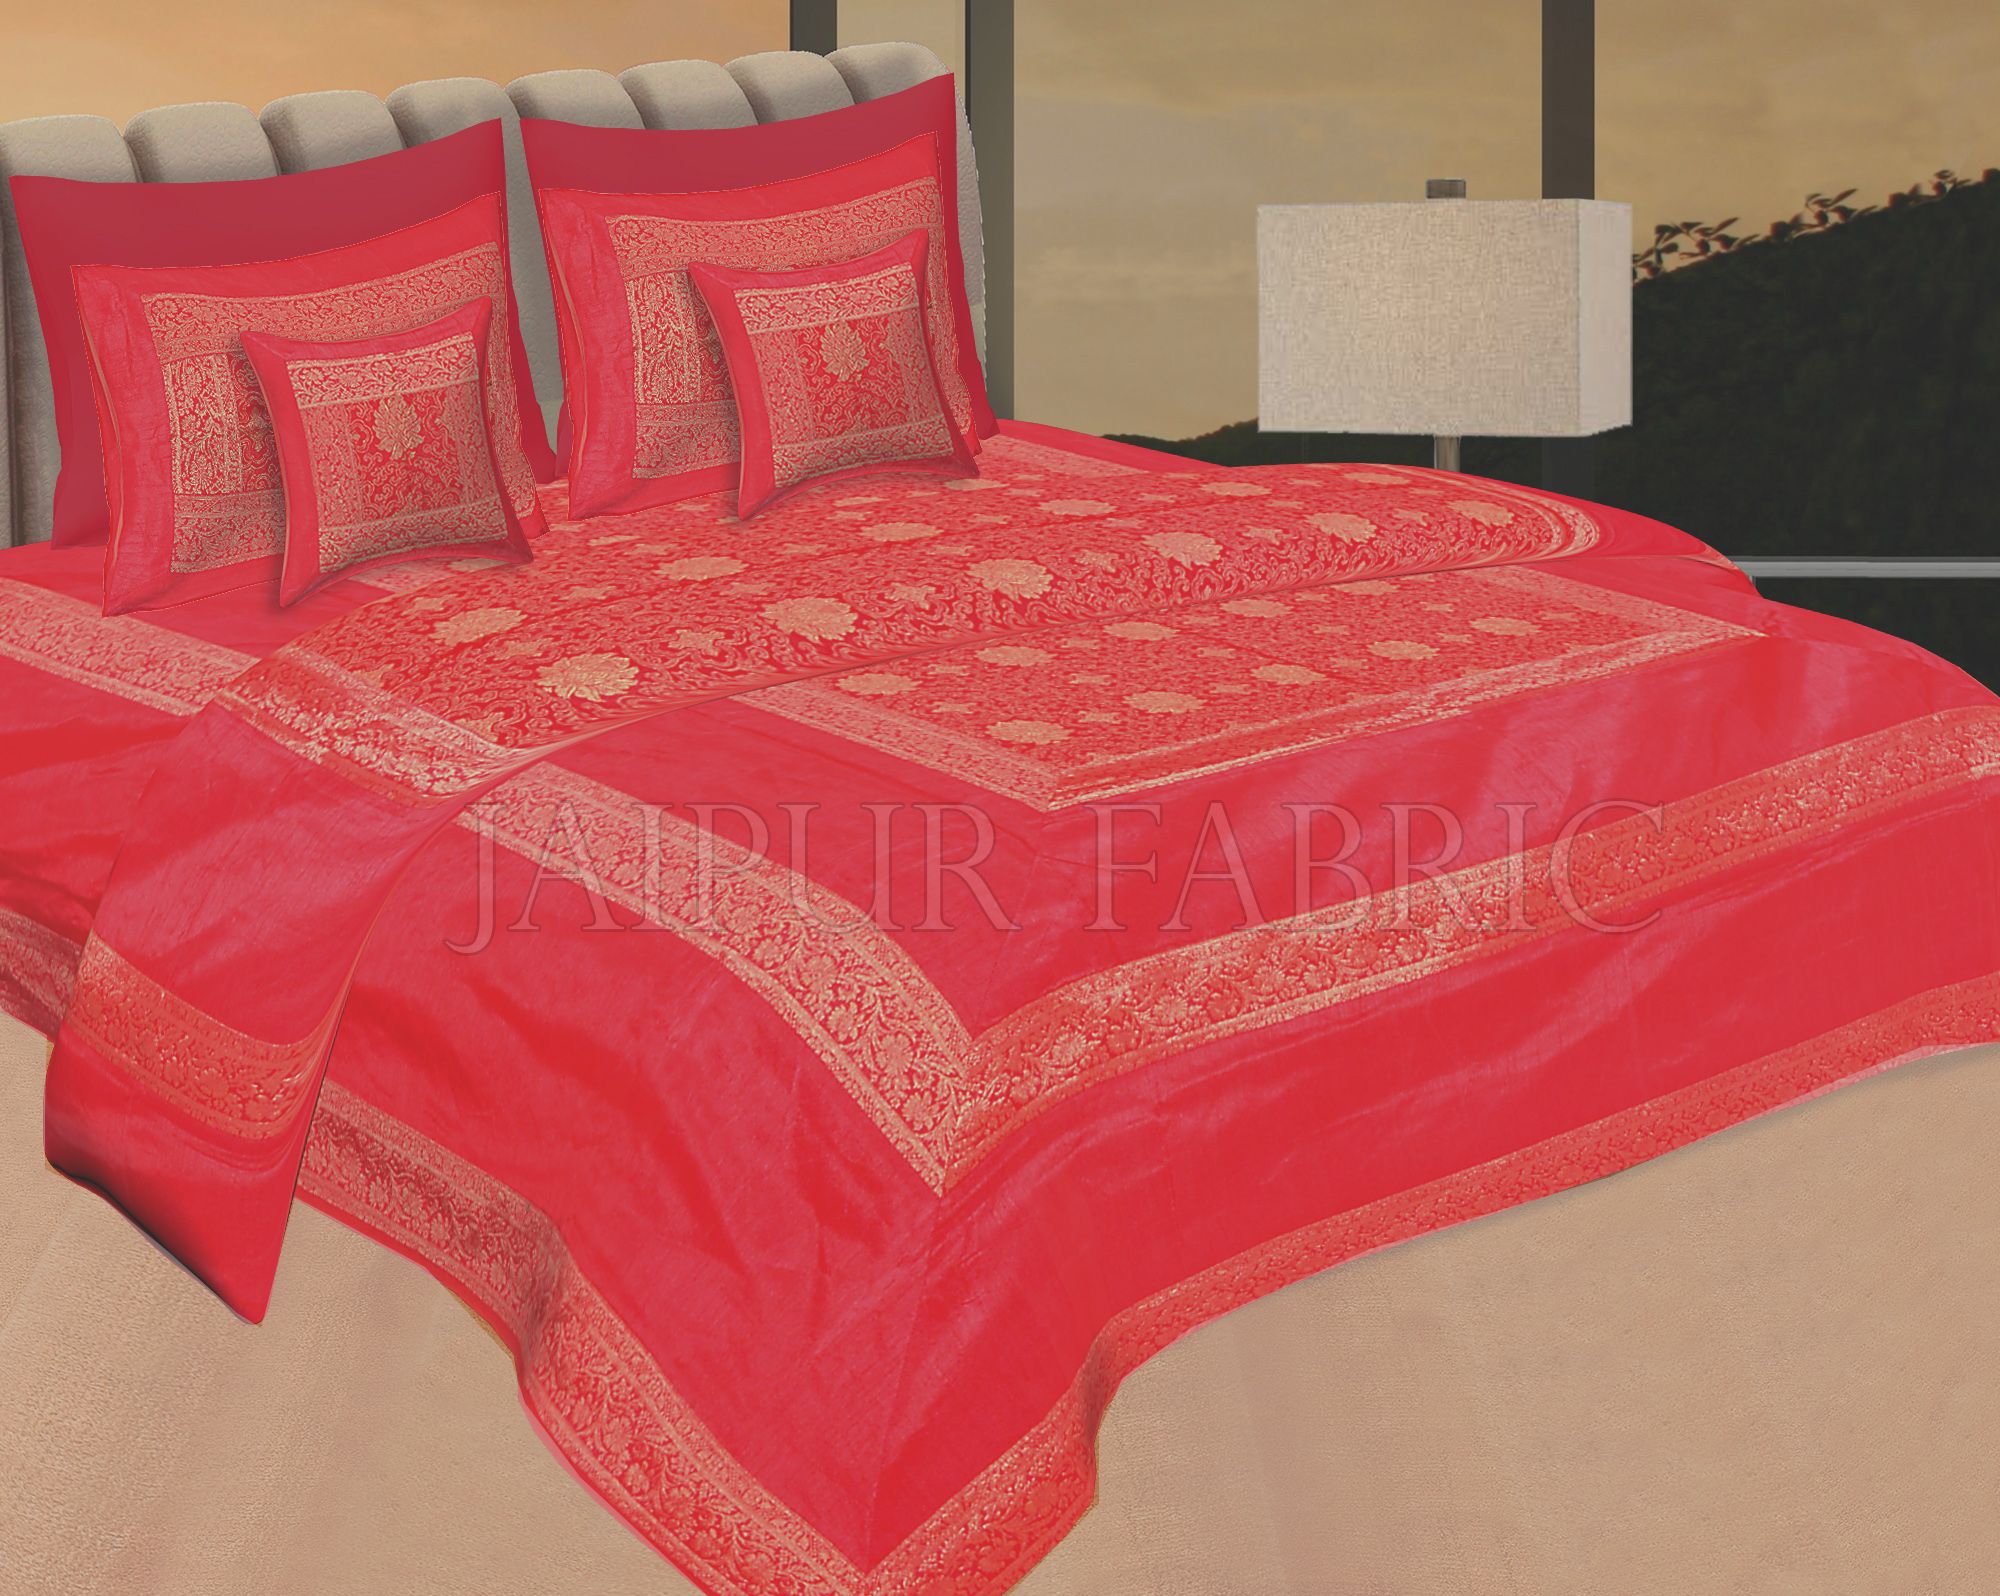 Red Rajasthani Zari Embroidered Lace Work Silk Double Bed Sheet